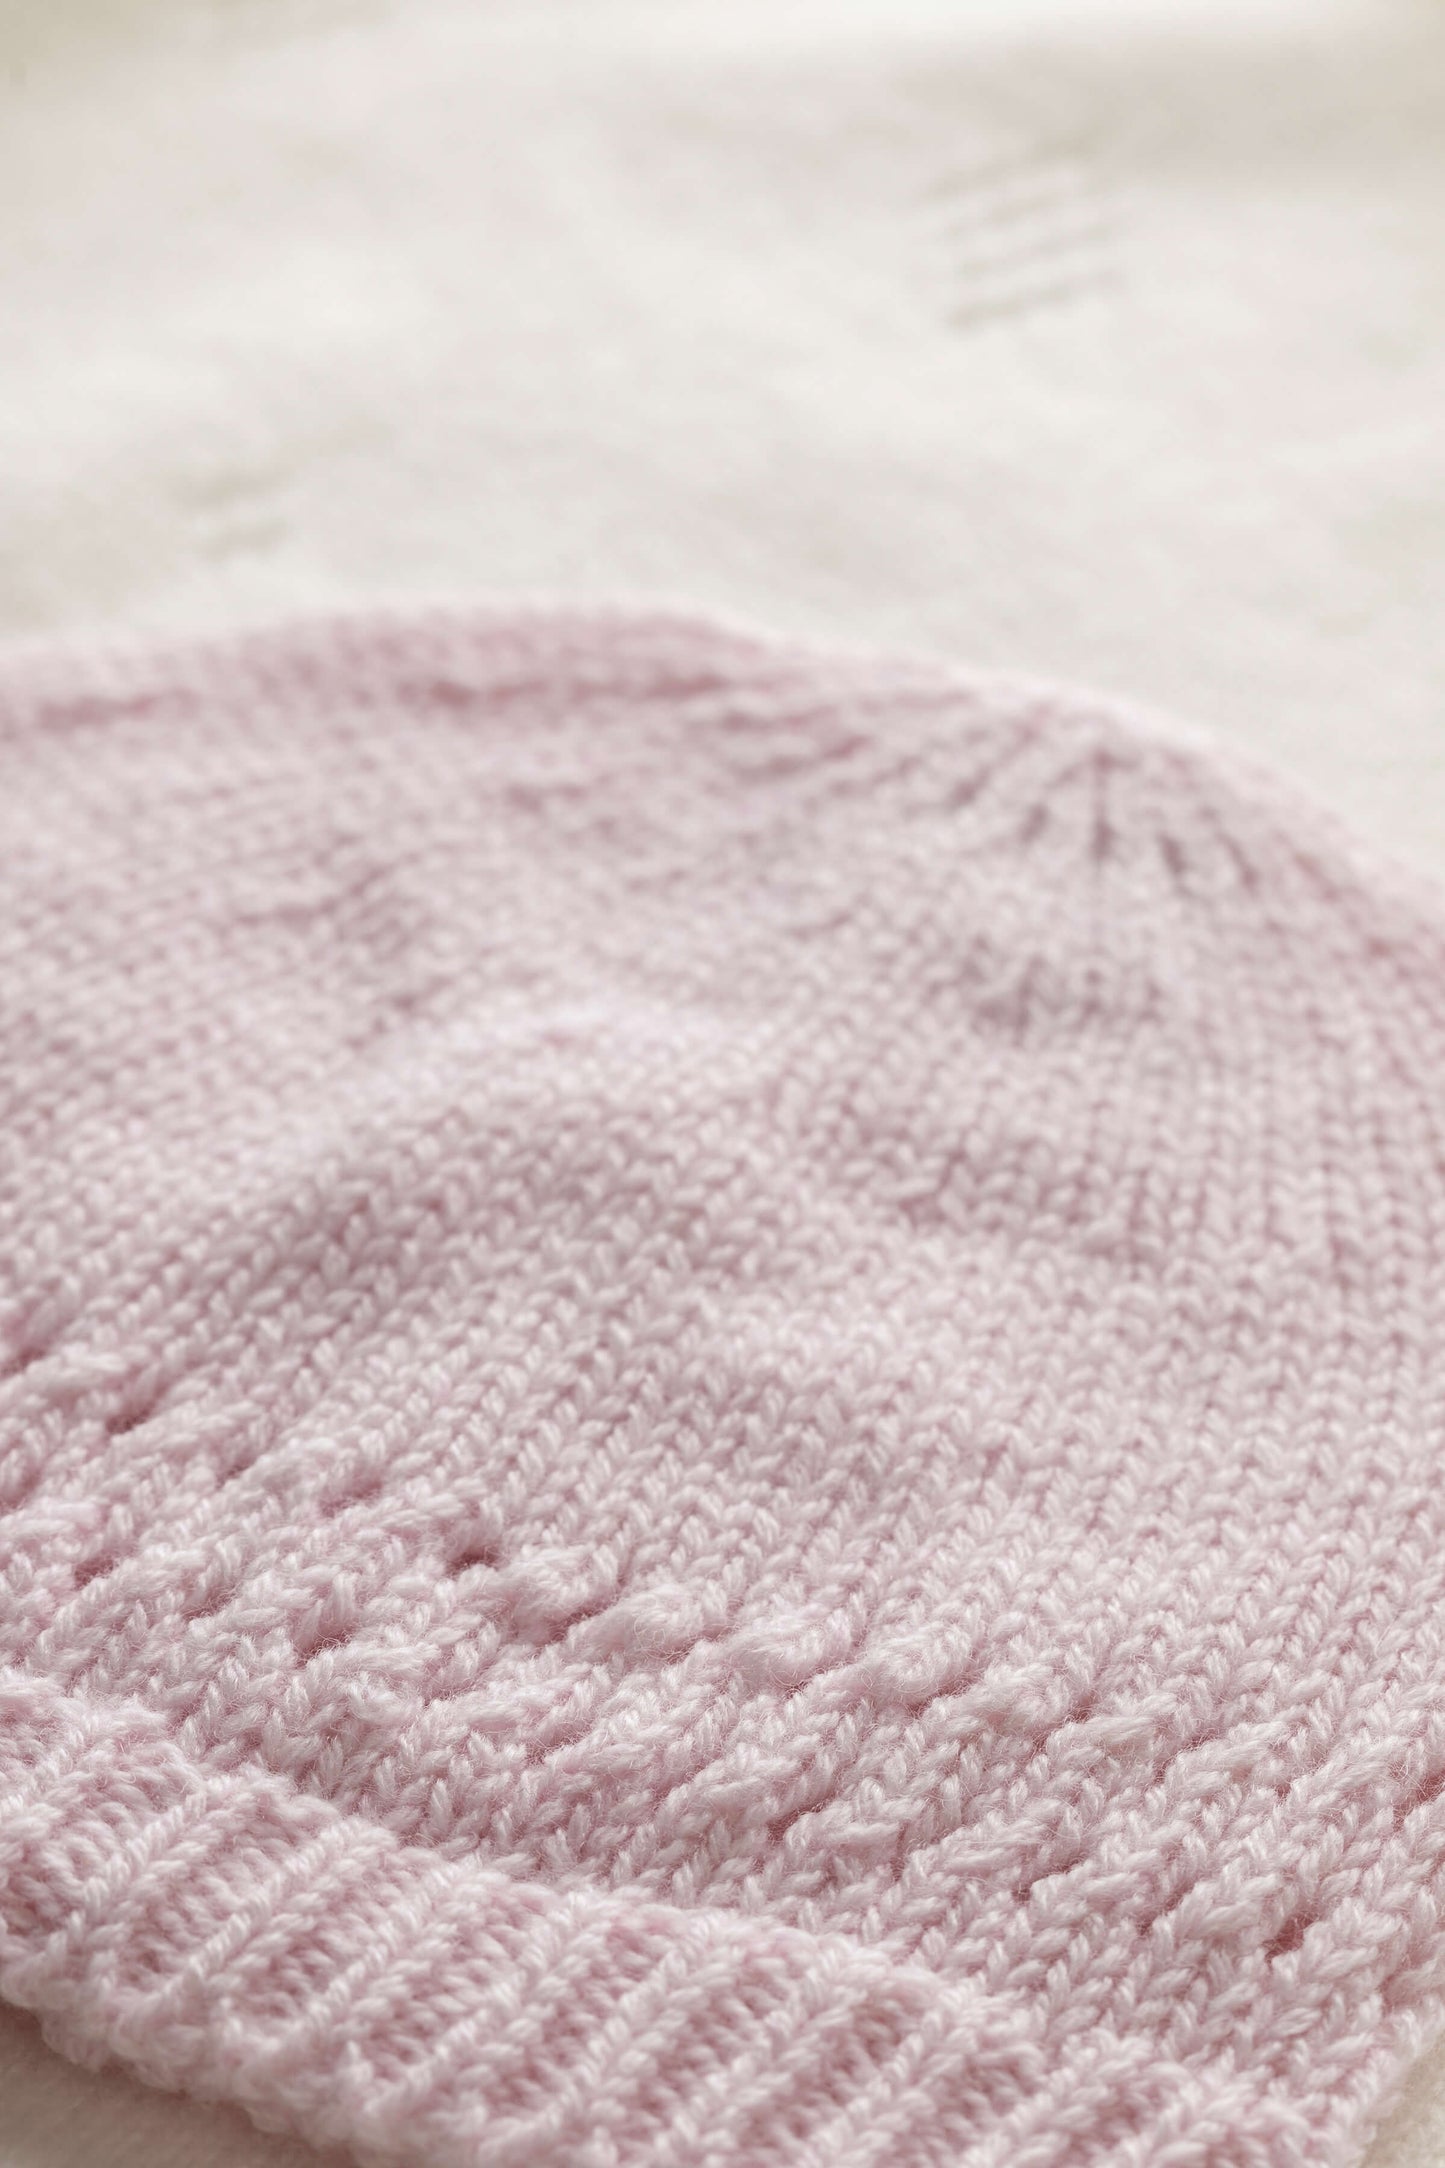 Johnstons of Elgin Baby Handknits Blush Hand Knitted Cashmere Baby Beanie 79011Se0208ONE